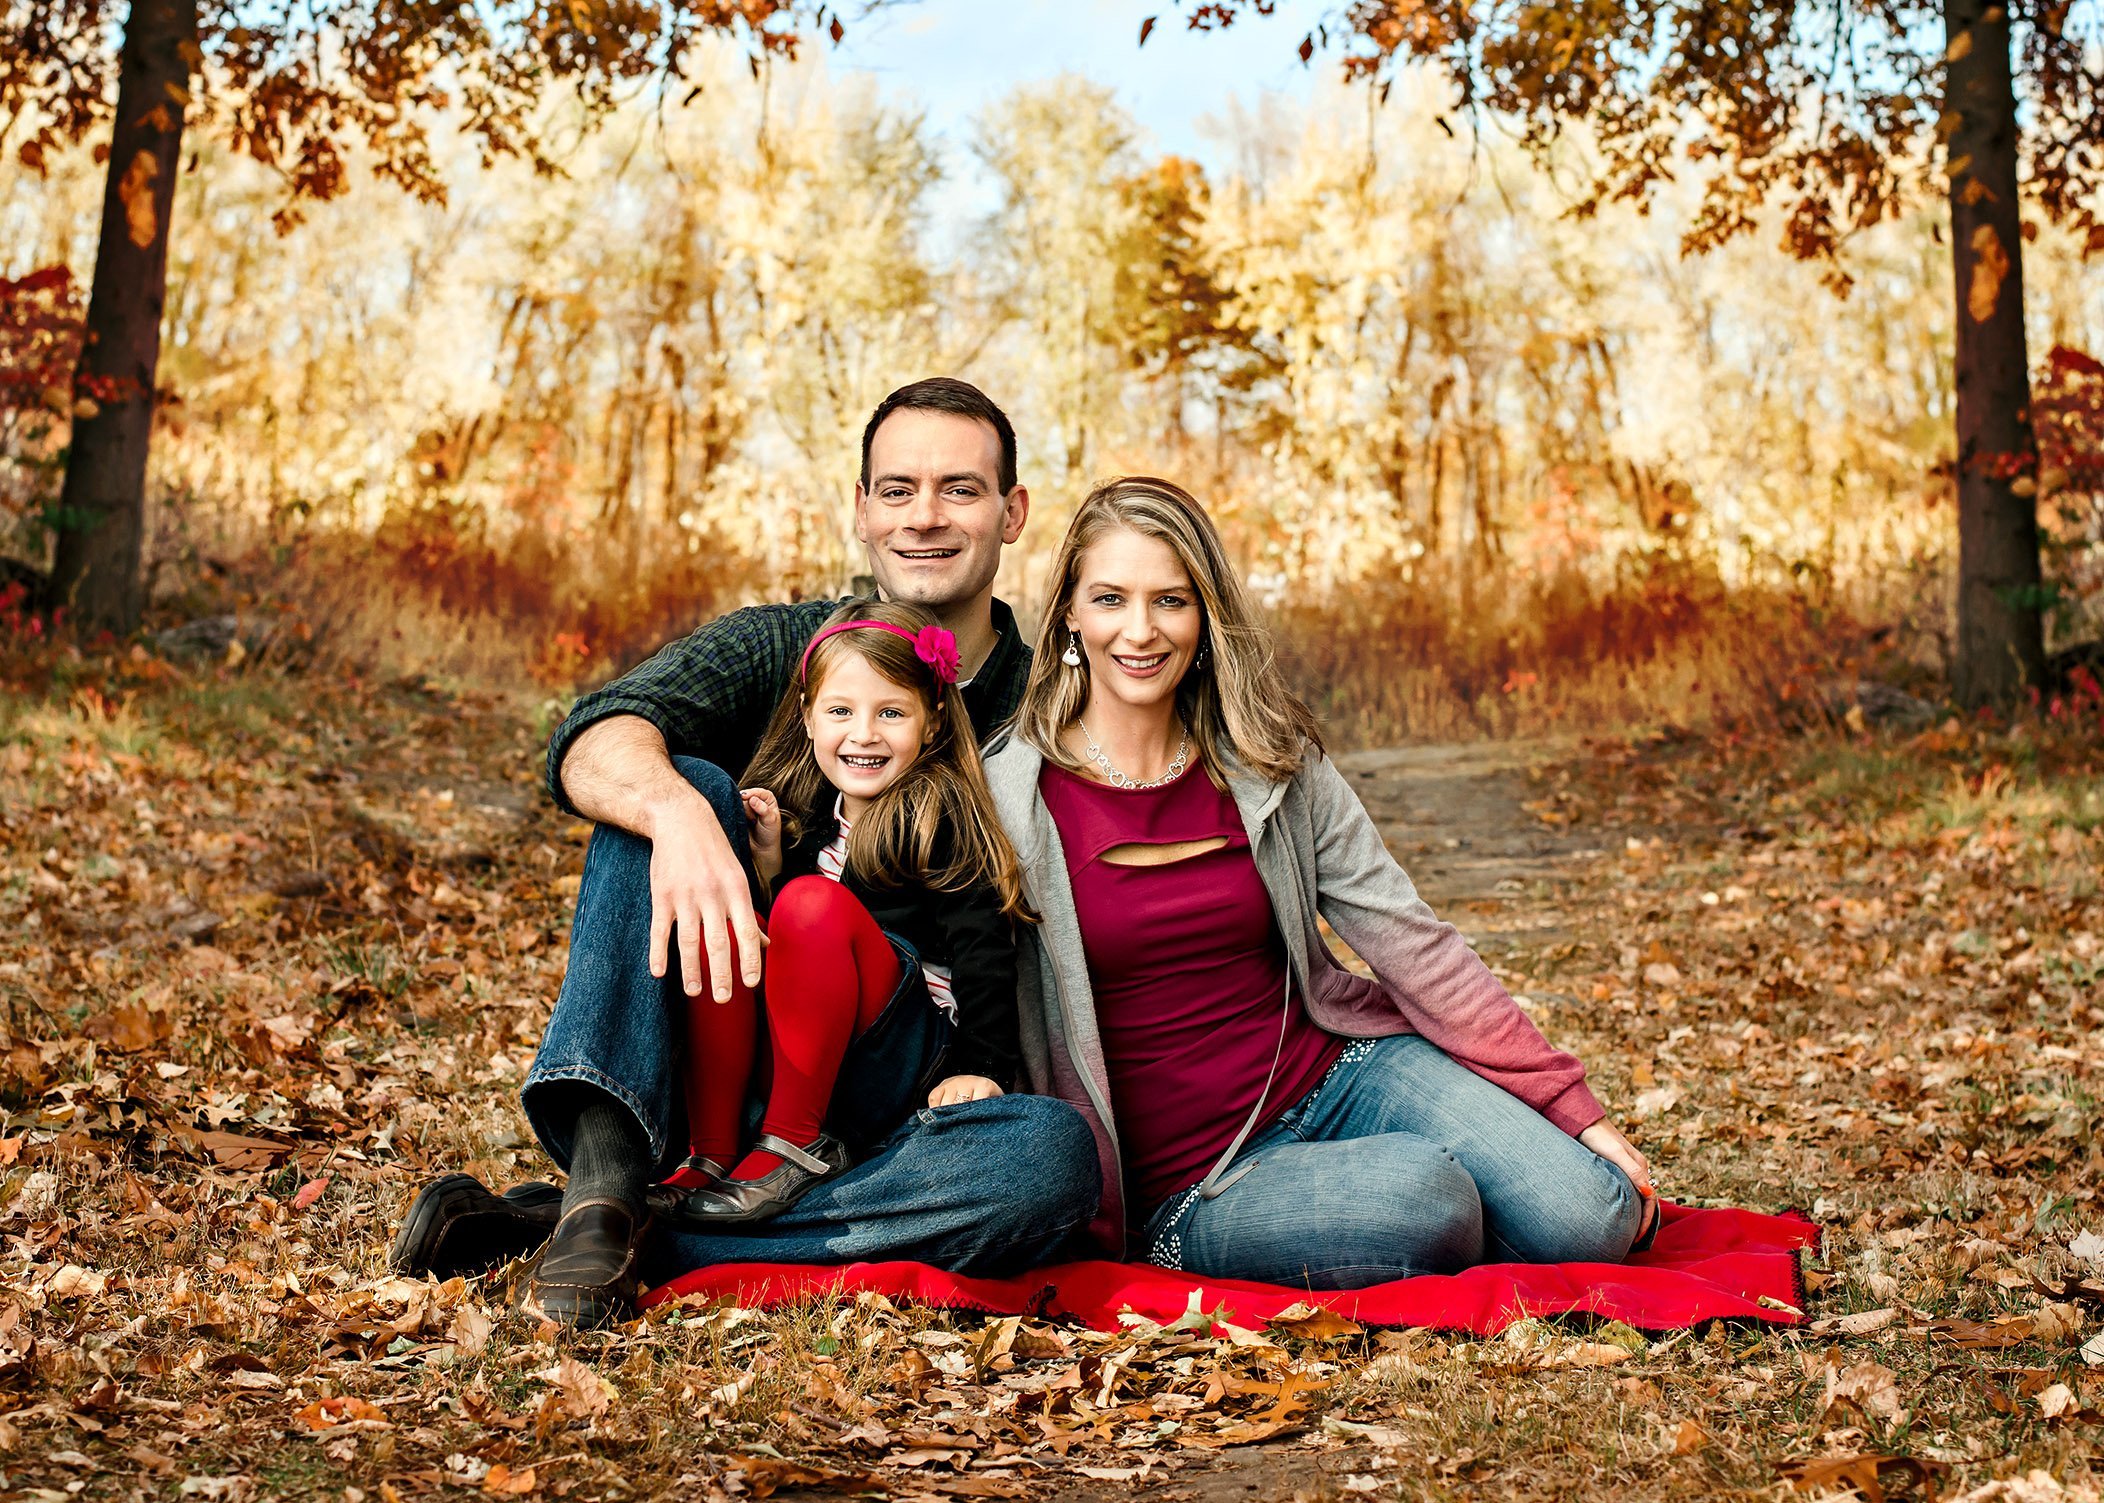 Family of 3 pose for a family portrait outside in the fall leaves